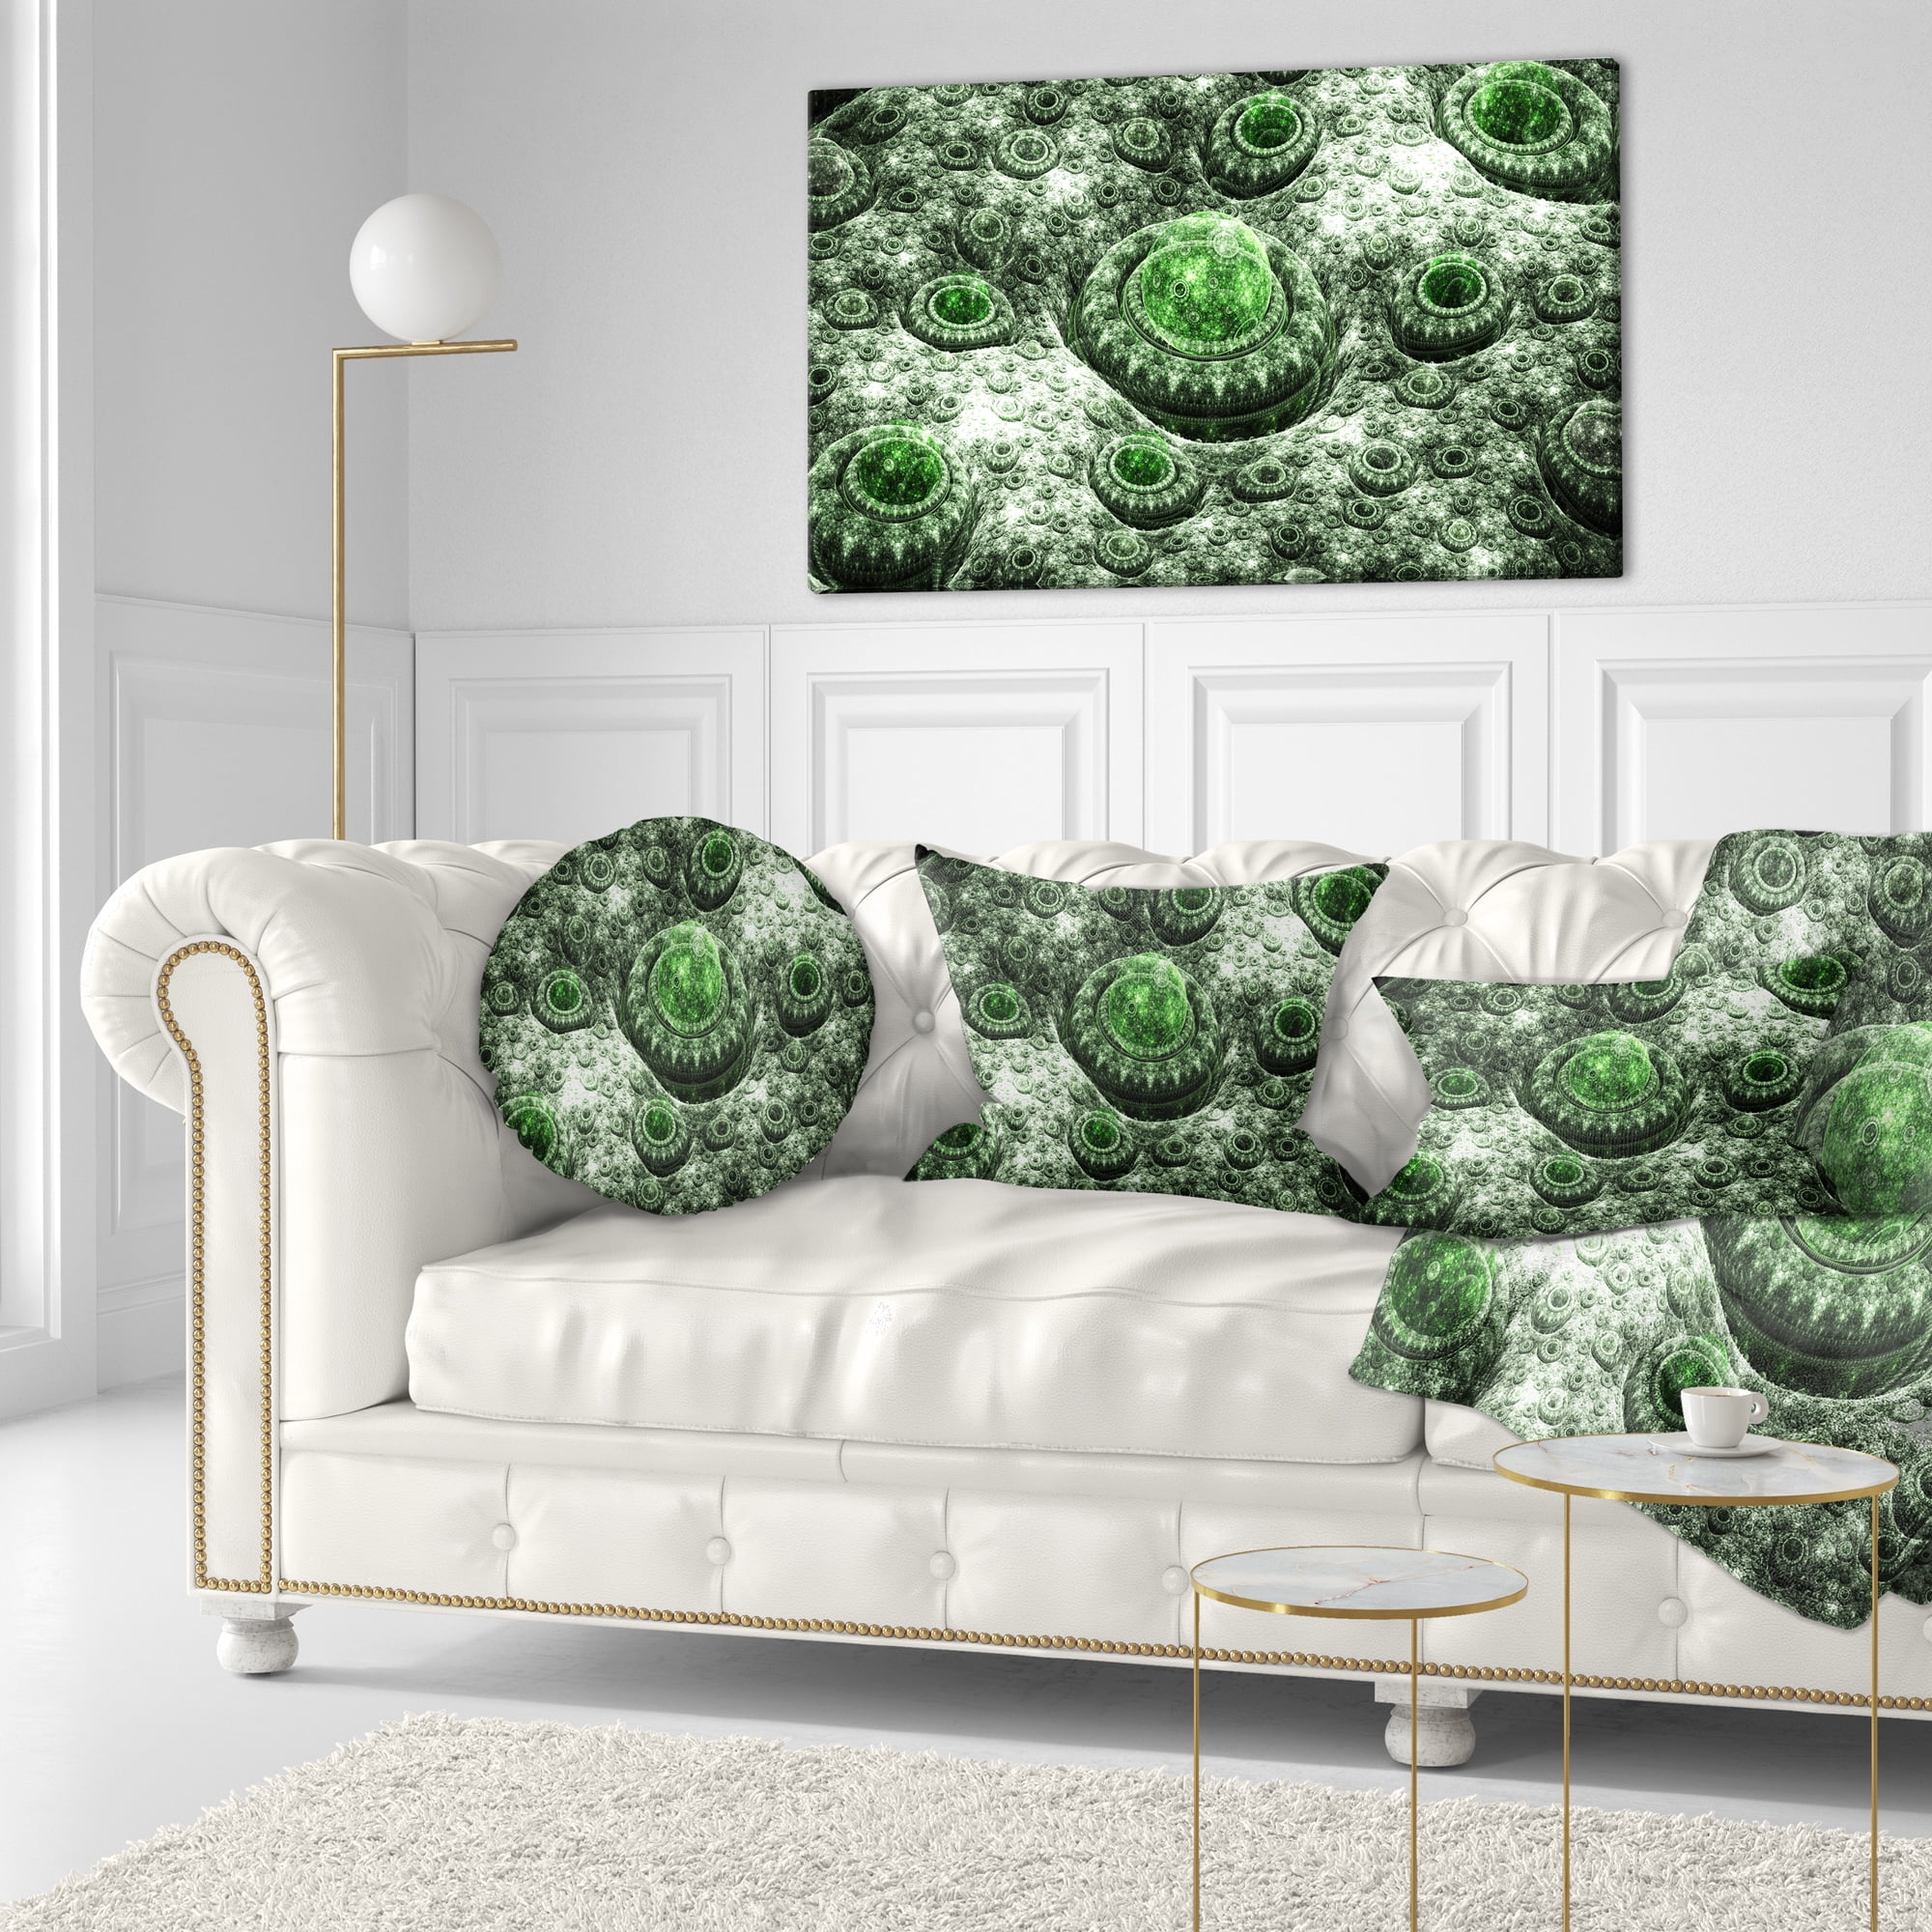 x 18 in Designart CU16507-18-18 Exotic Green Fractal Landscape Abstract Cushion Cover for Living Room in Sofa Throw Pillow 18 in Insert Printed On Both Side 